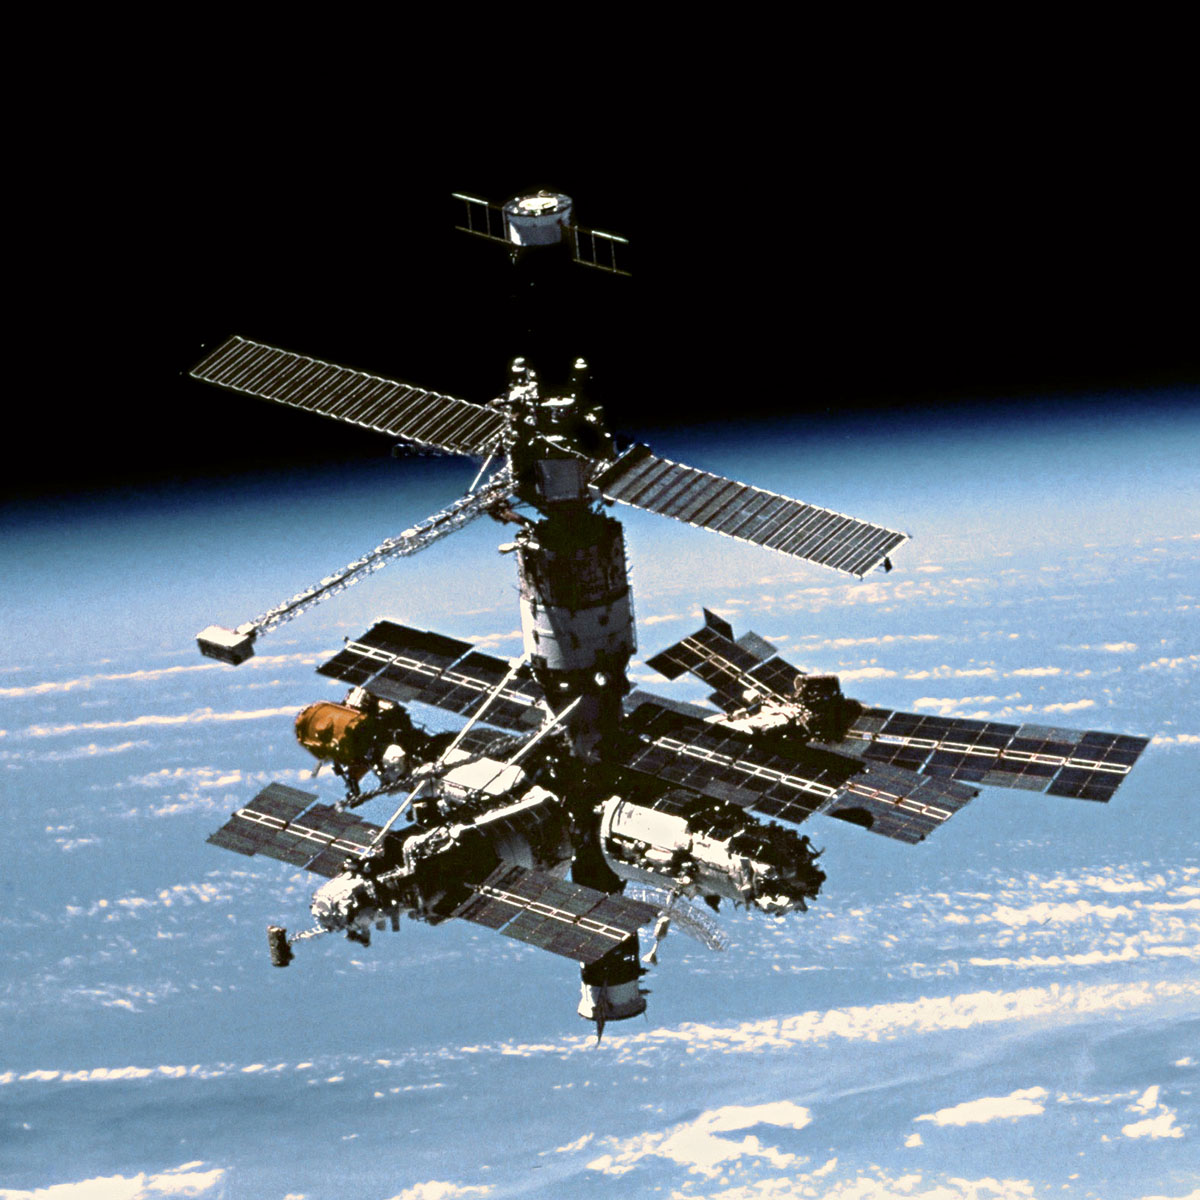 Russian space station Mir